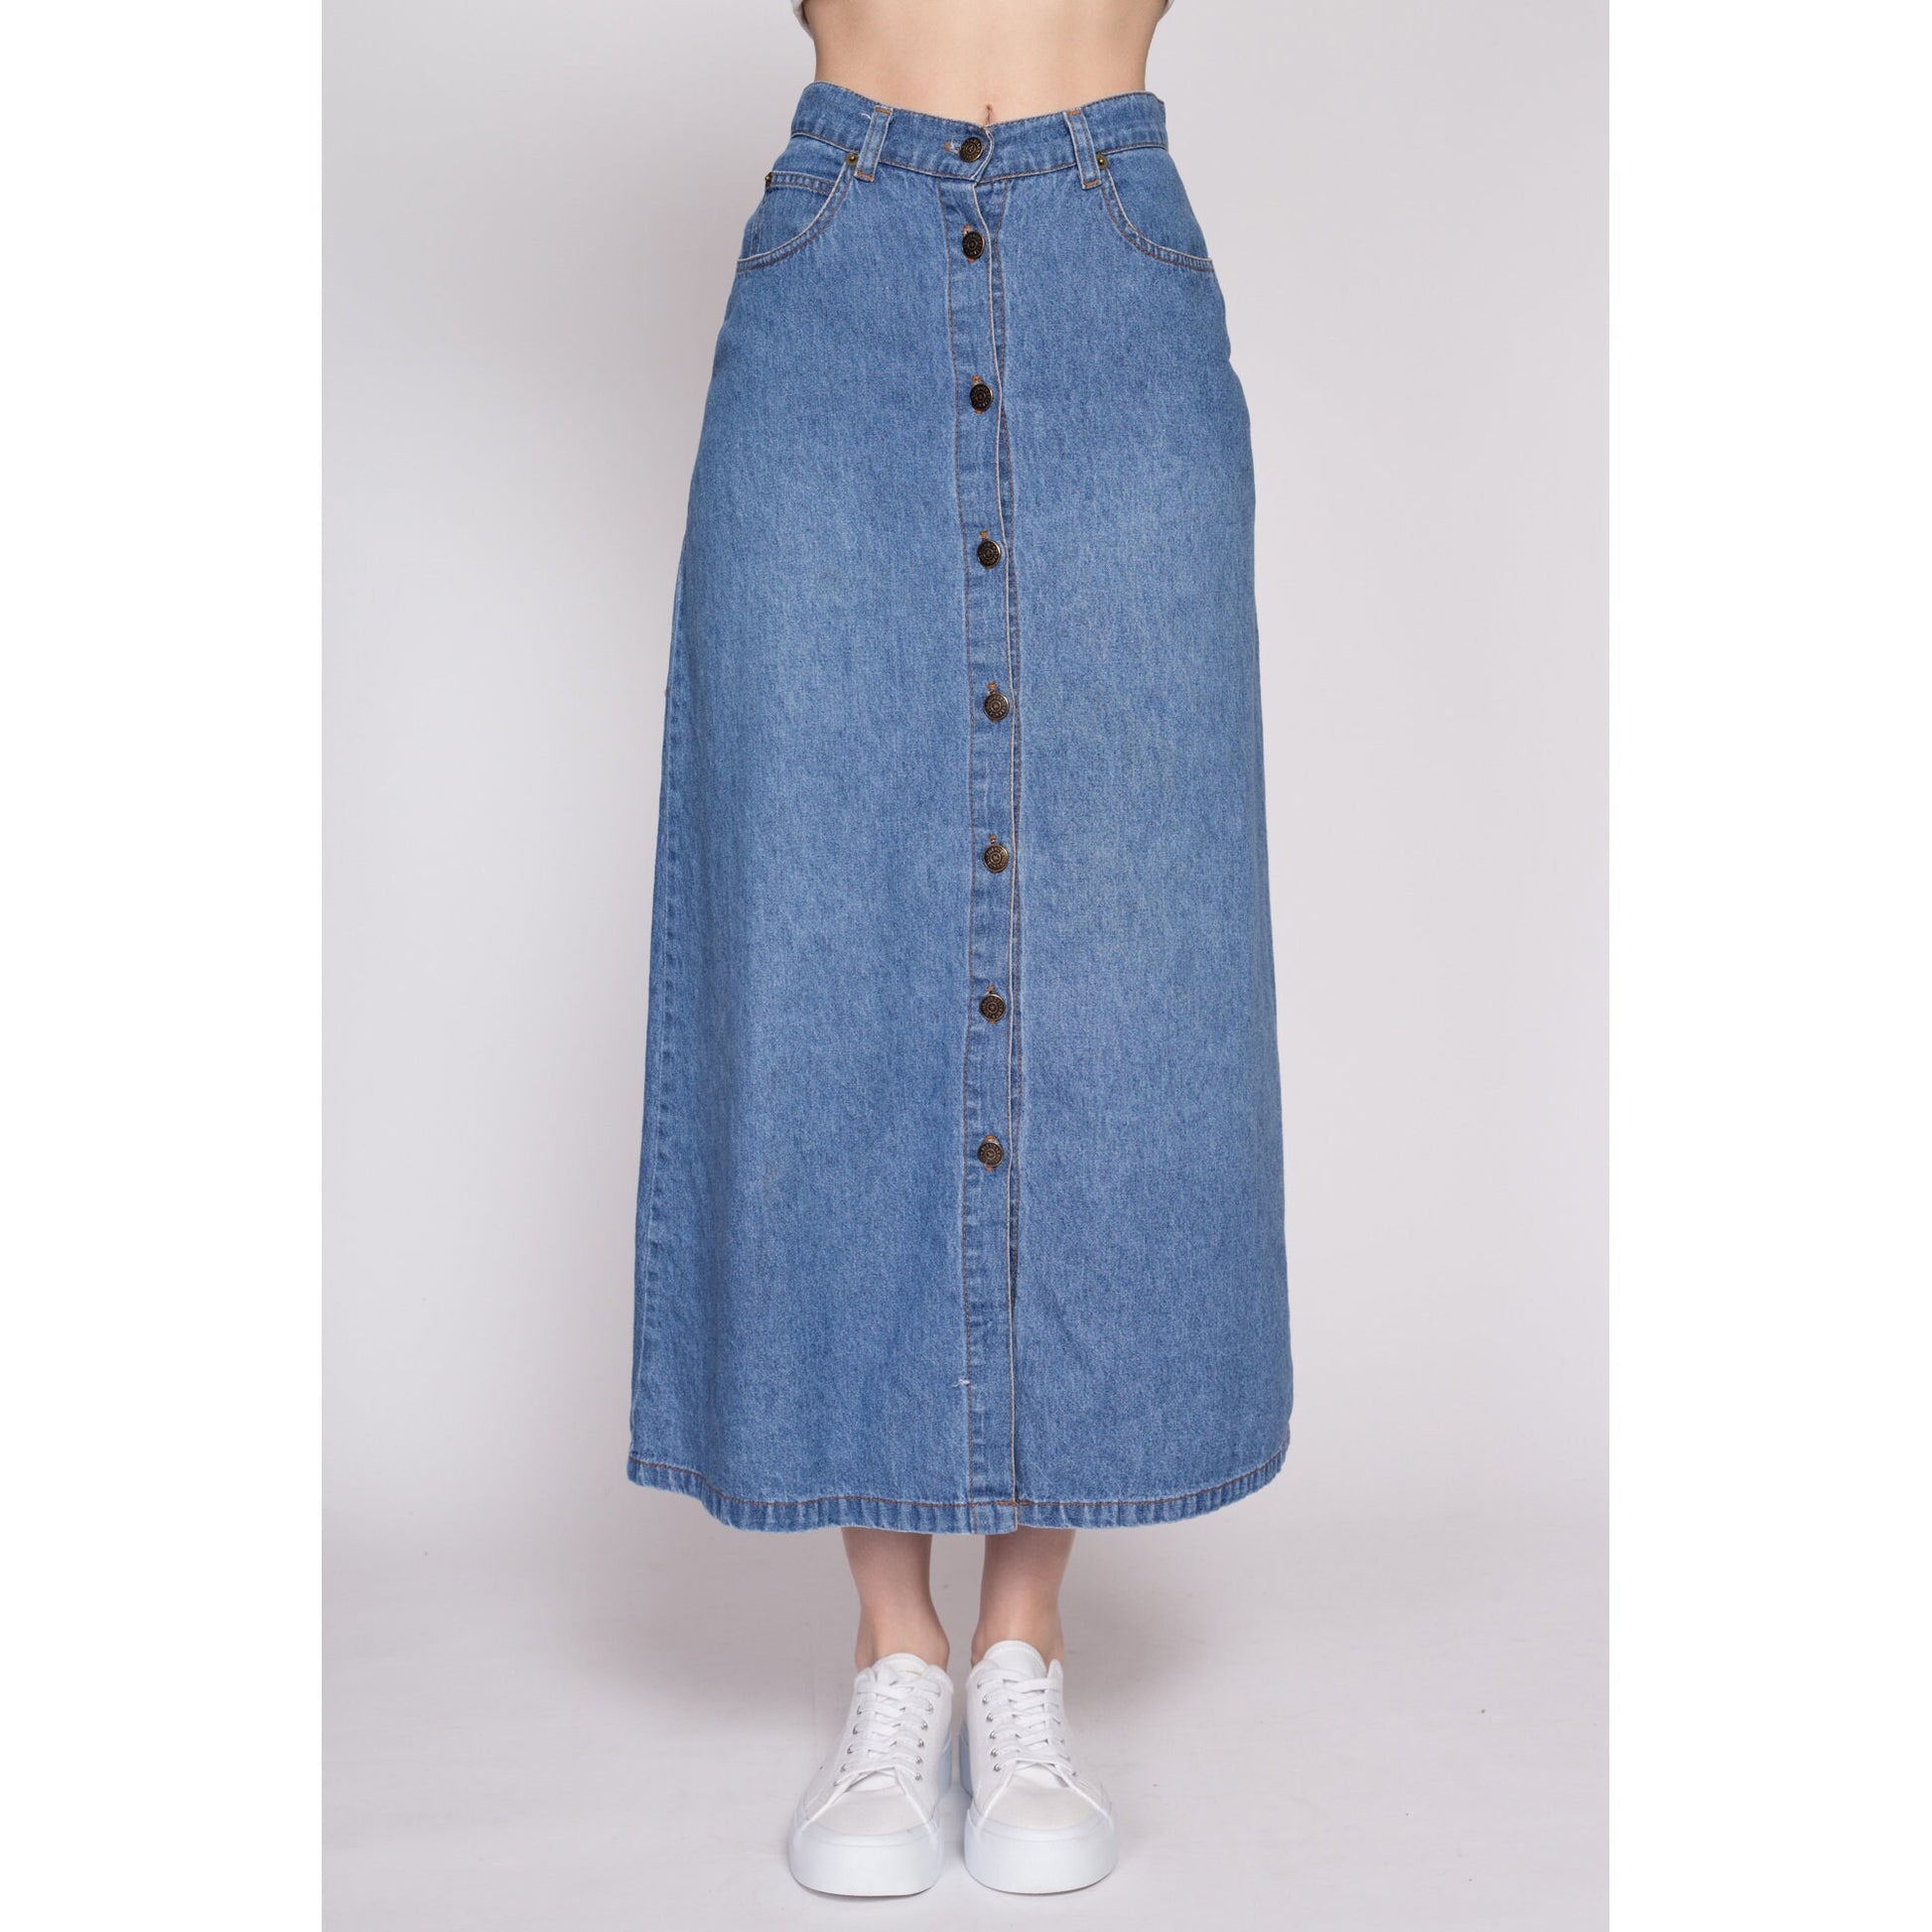 XS-S| 90s Denim Button Front Maxi Skirt - XS to Small, 25" | Vintage Grunge High Waisted Medium Wash Jean Skirt